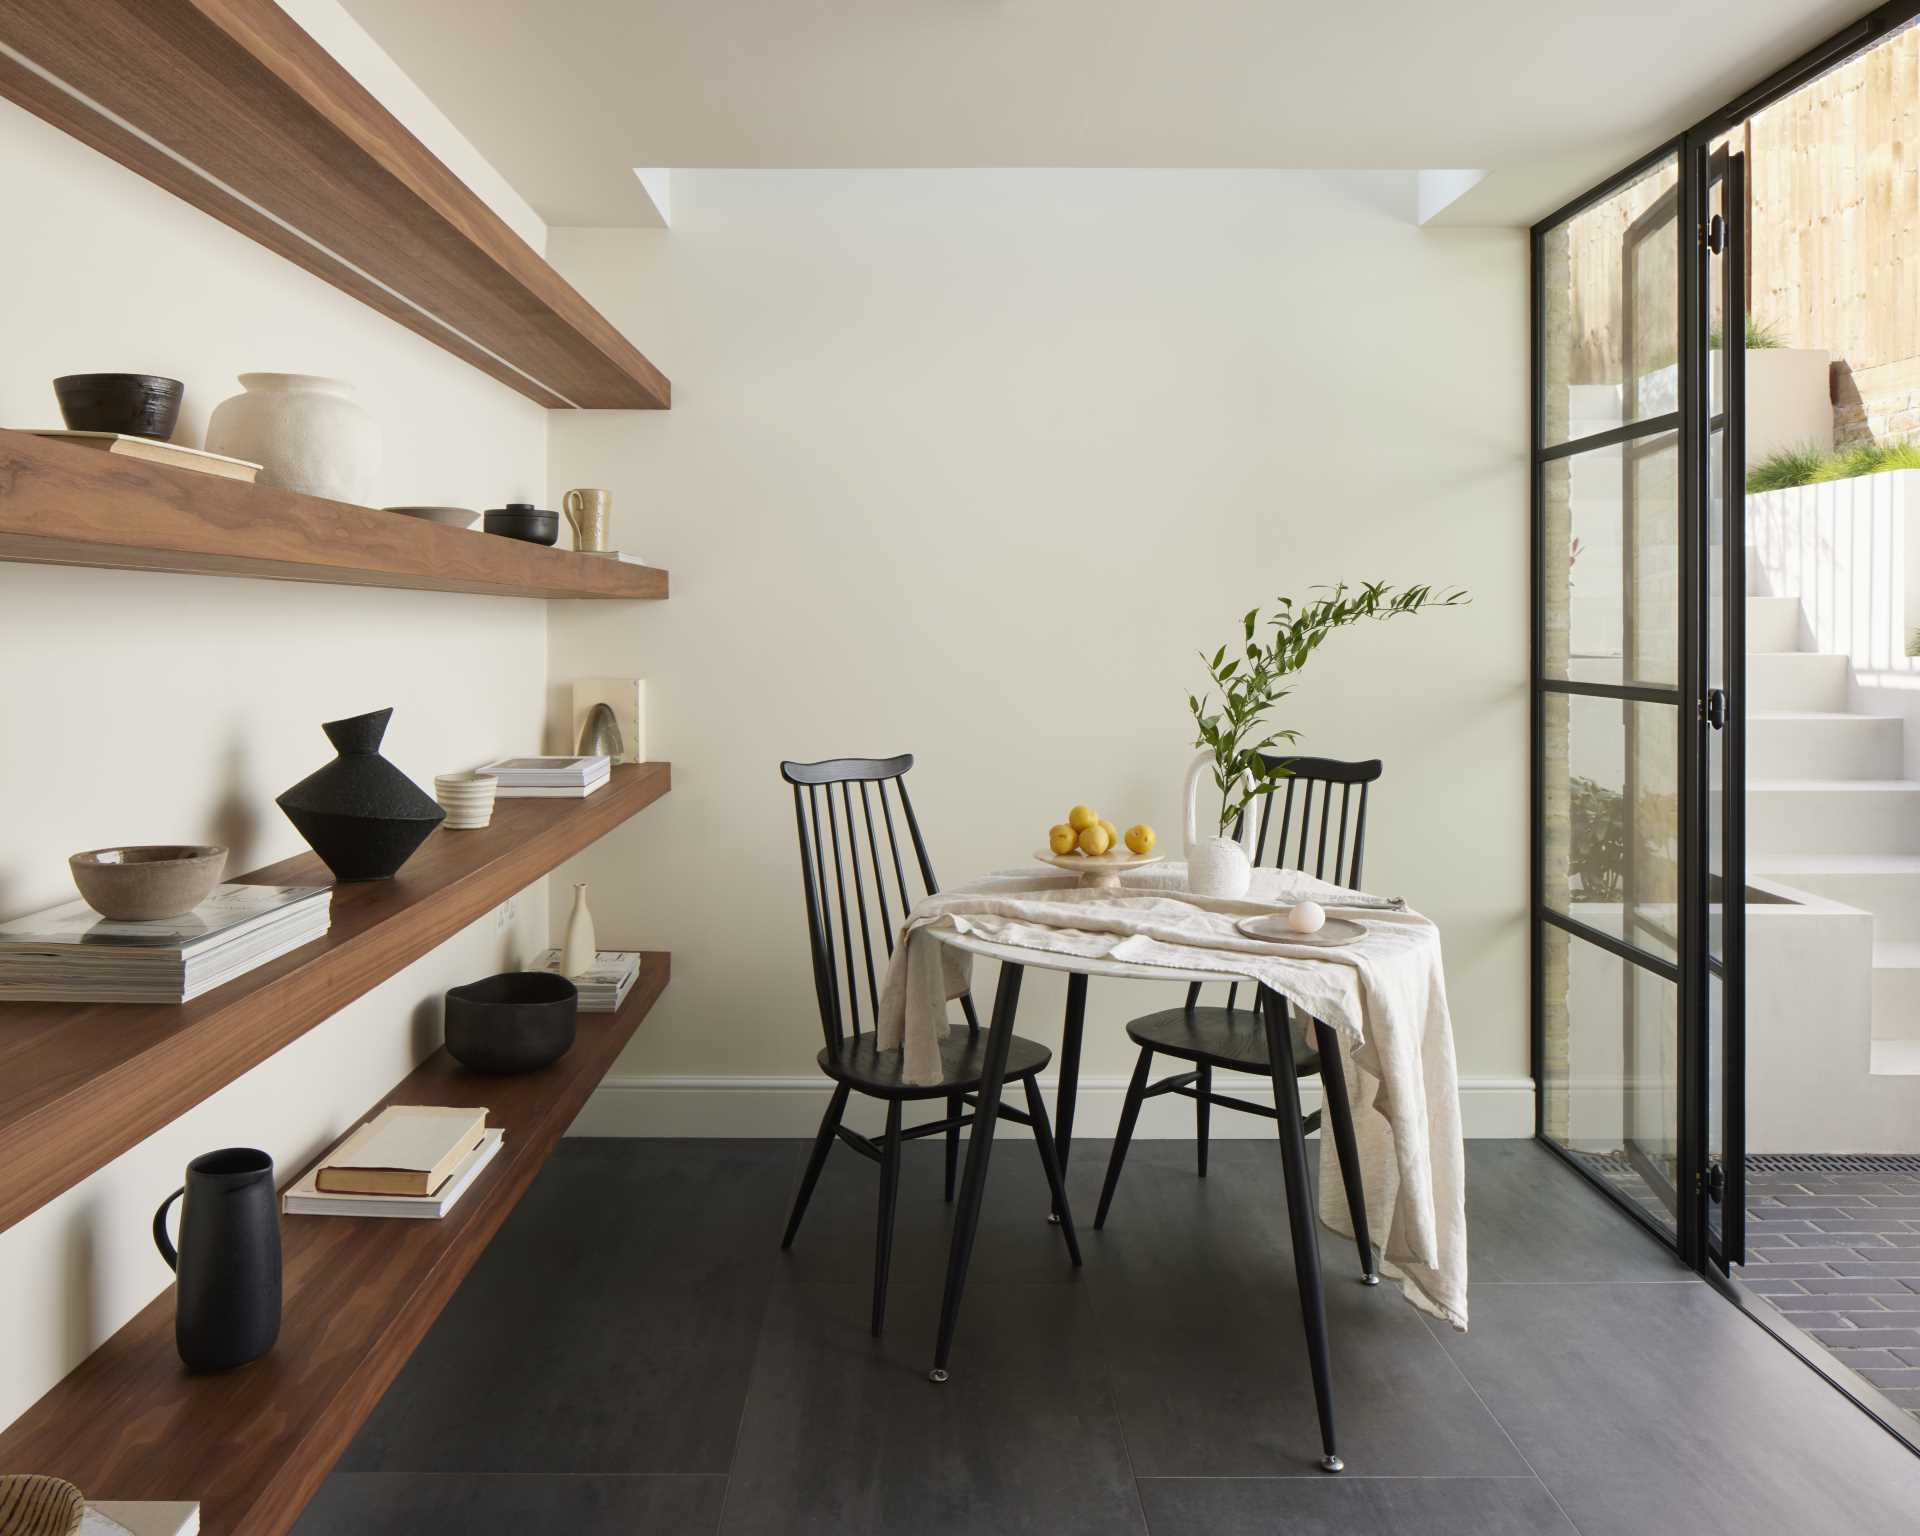 Black framed glass doors connect the patio with a breakfast room, which has been finished with dark floor tiles and light walls.